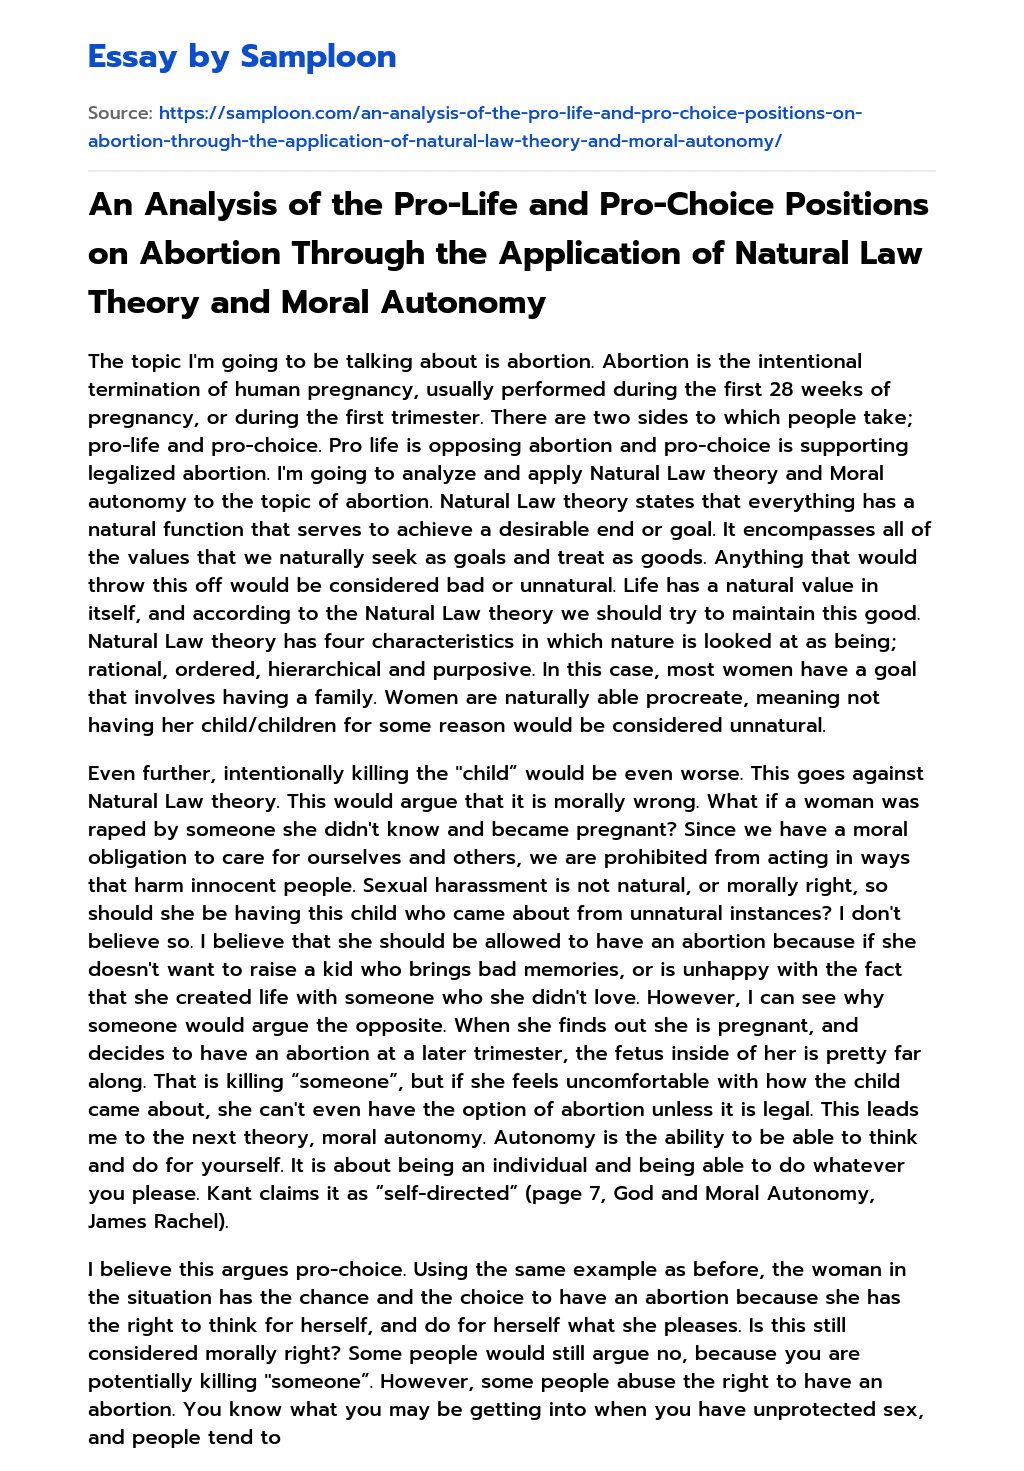 An Analysis of the Pro-Life and Pro-Choice Positions on Abortion Through the Application of Natural Law Theory and Moral Autonomy essay